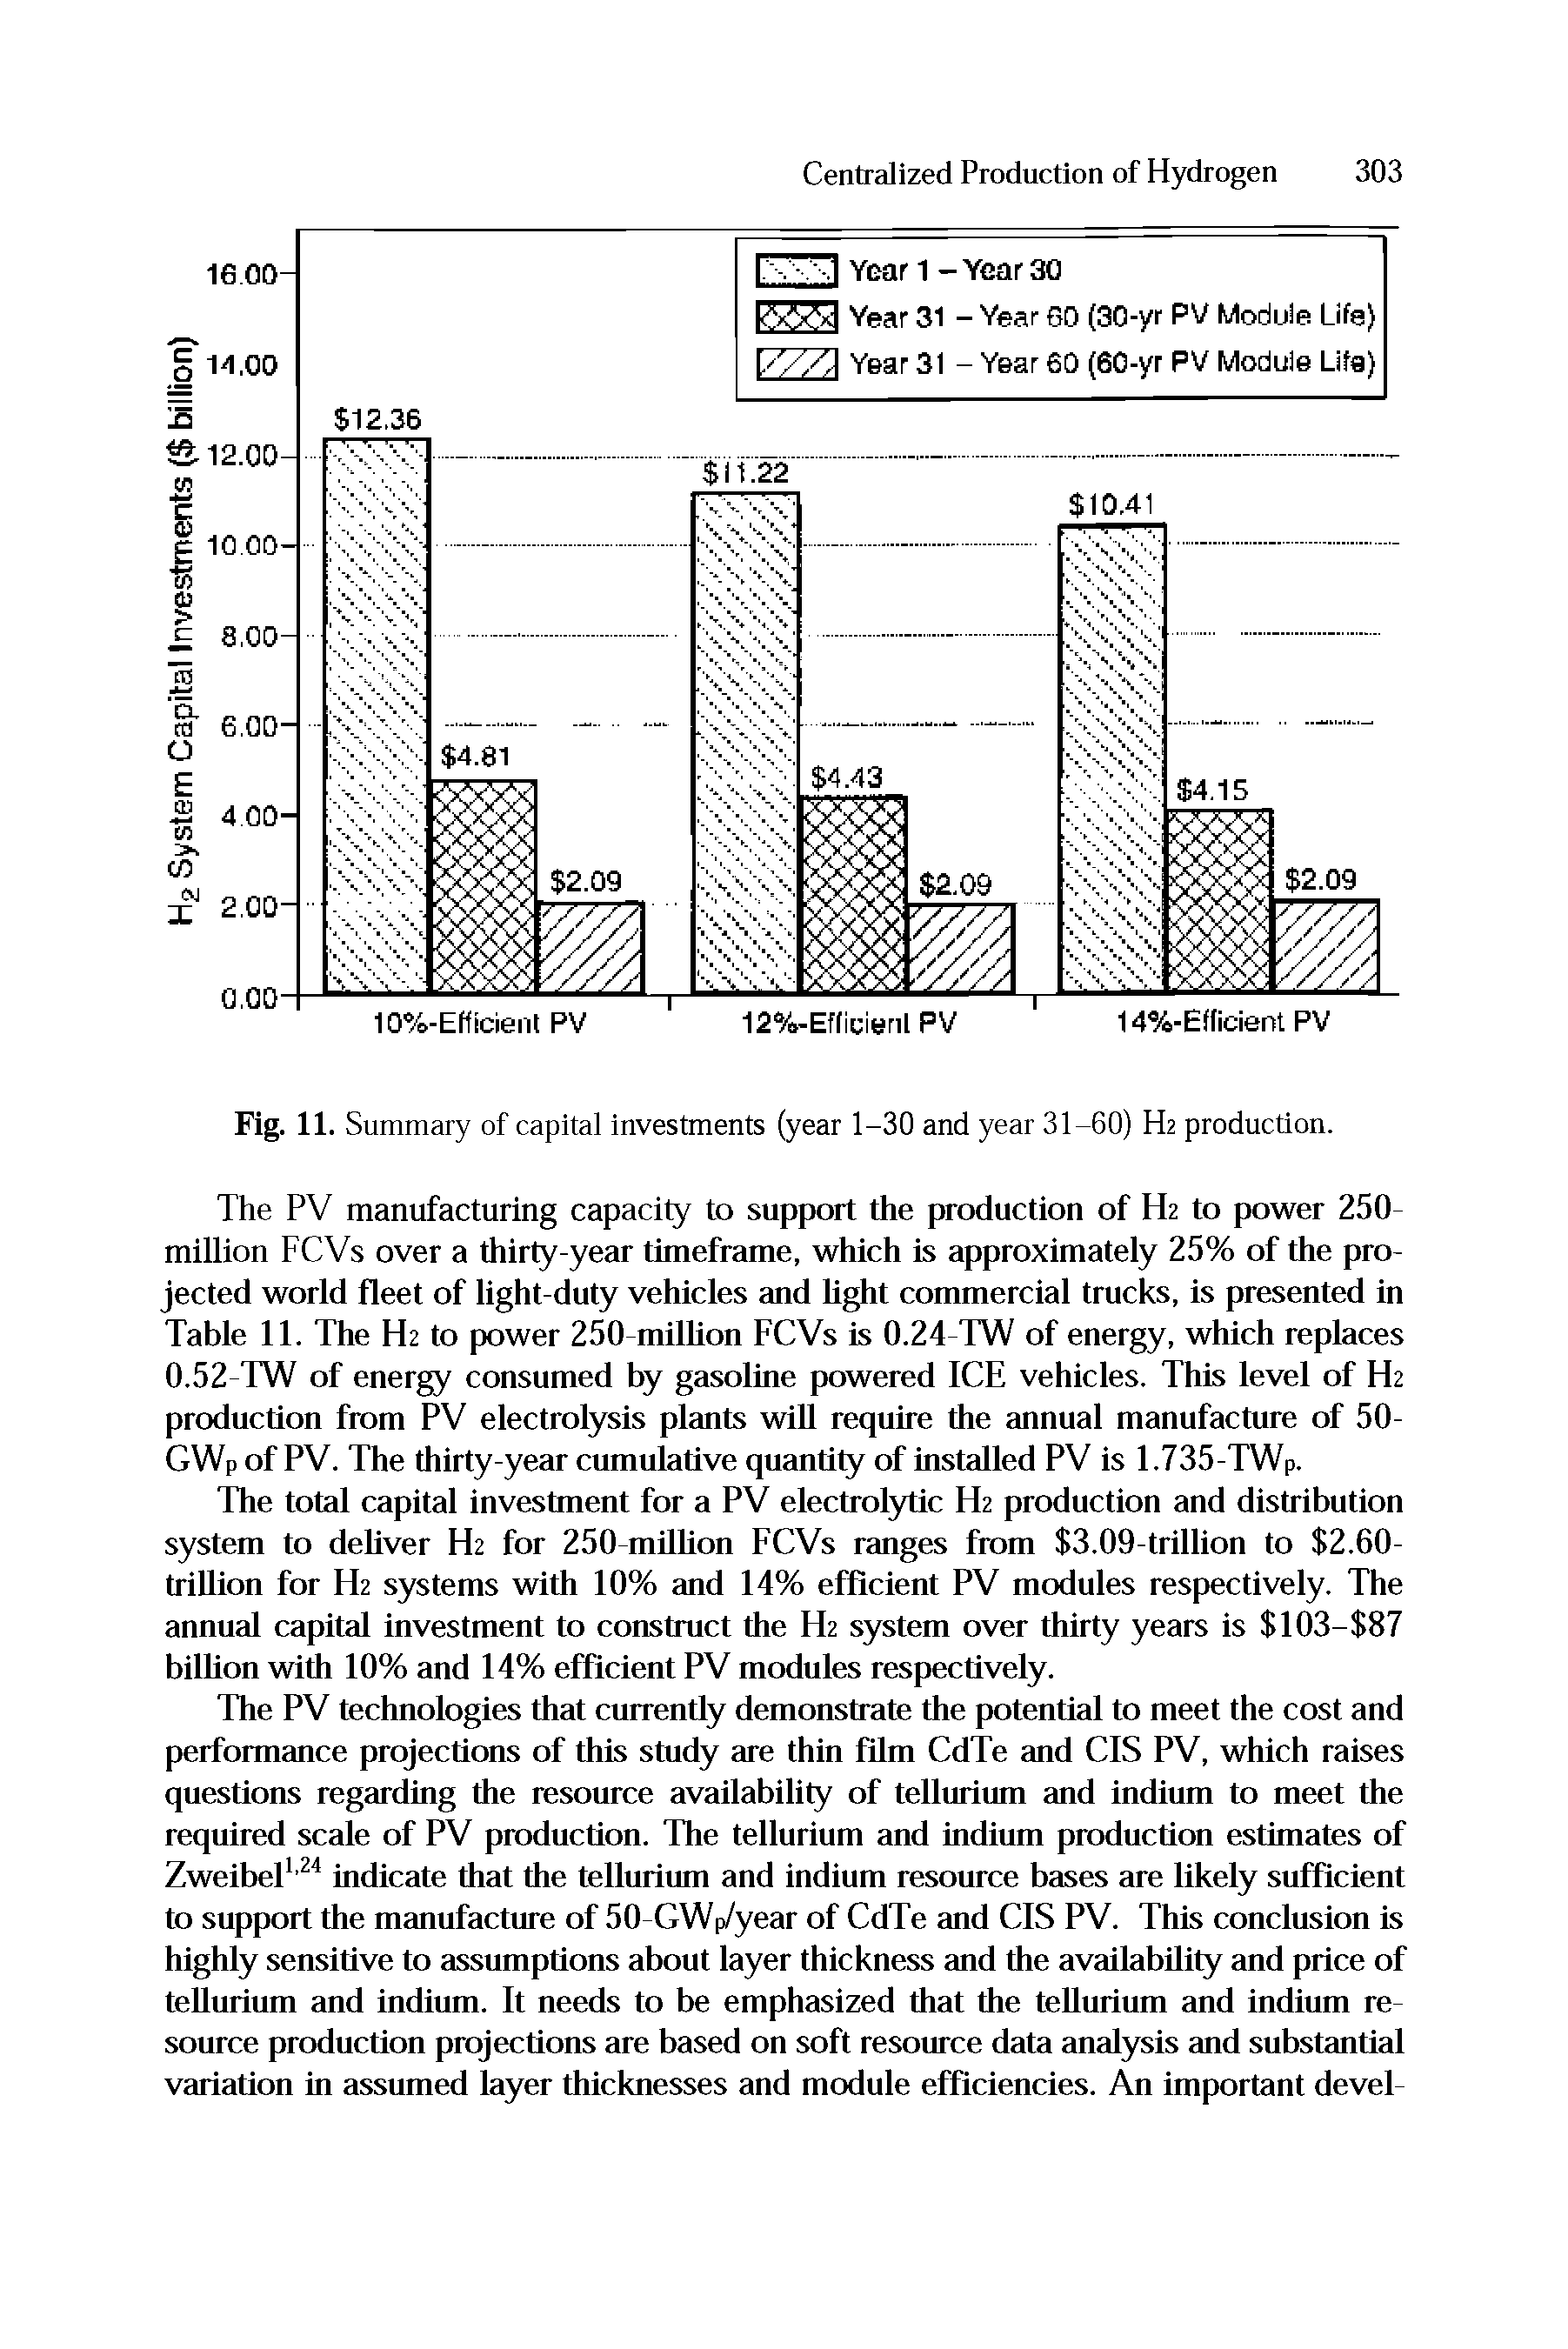 Fig. 11. Summary of capital investments (year 1-30 and year 31-60) H2 production.